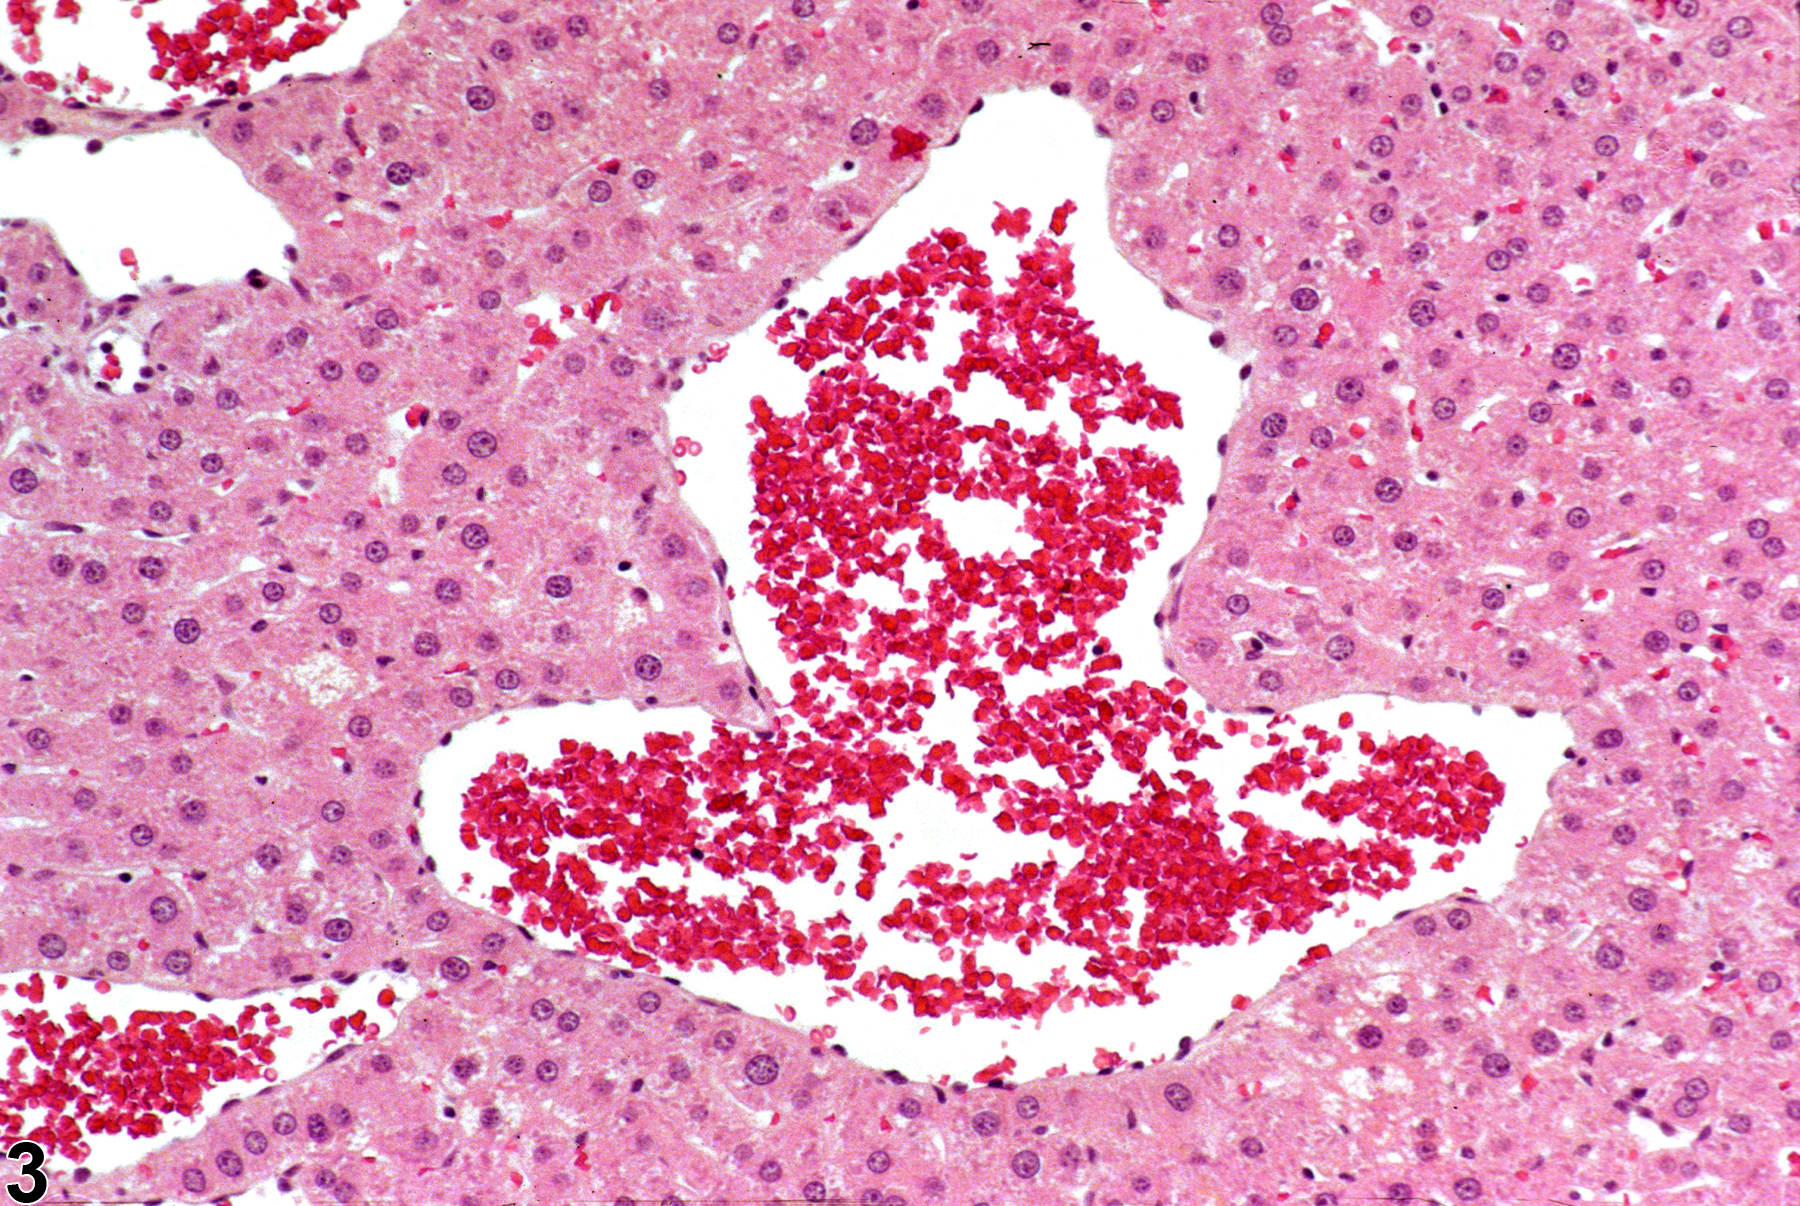 Image of angiectasis in the liver from a female F344/N rat